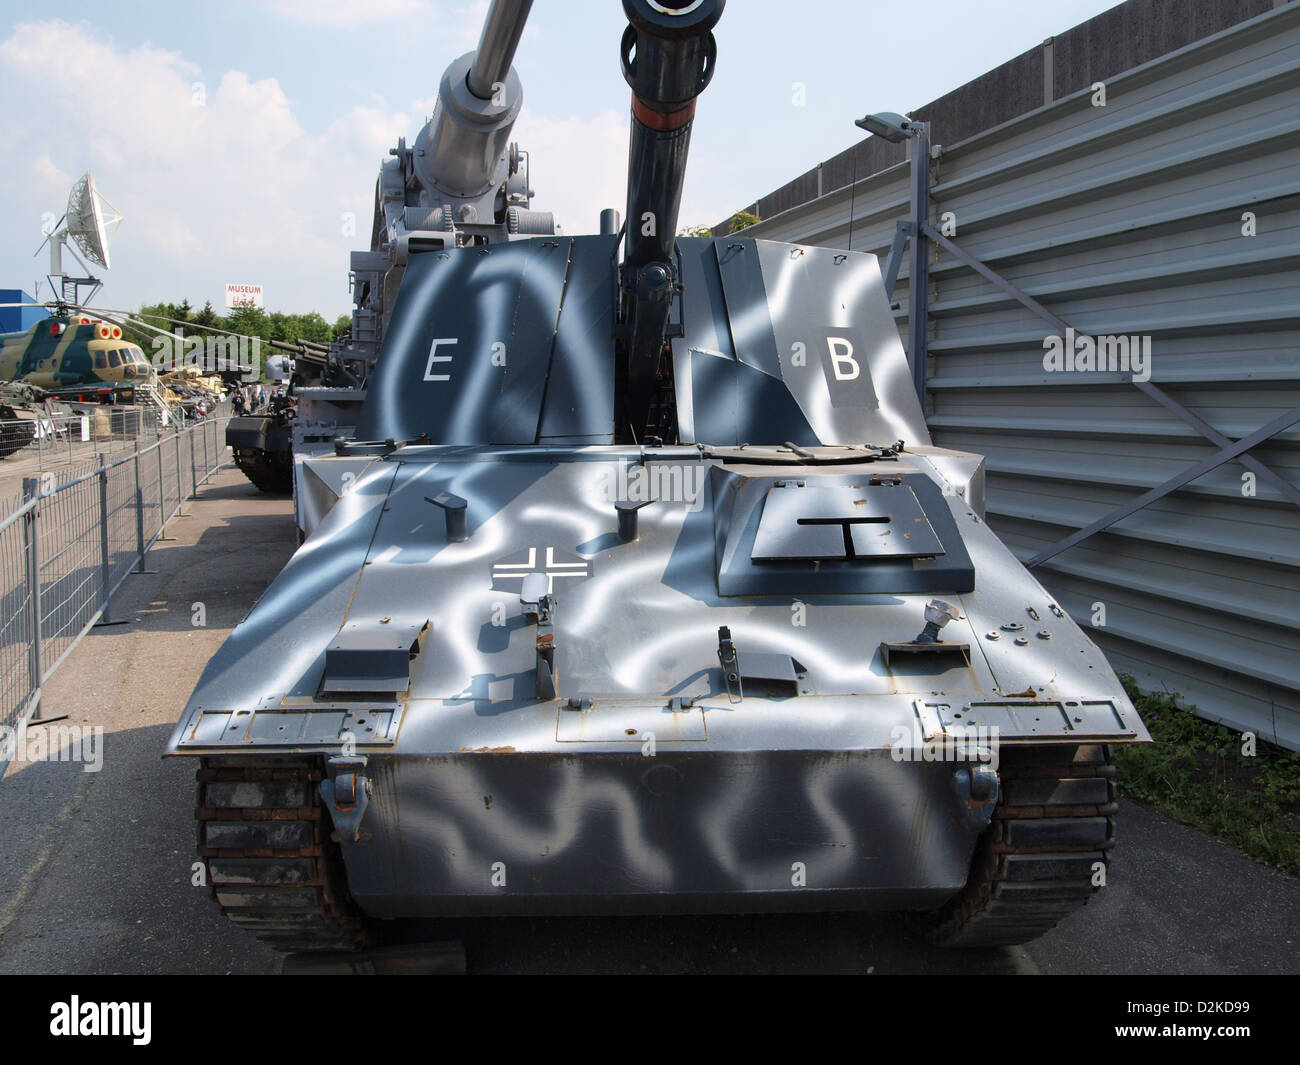 Wespe 105mm selfpropelled howitzer based on a Skoda LT38 tank chassis at Sinsheim Stock Photo